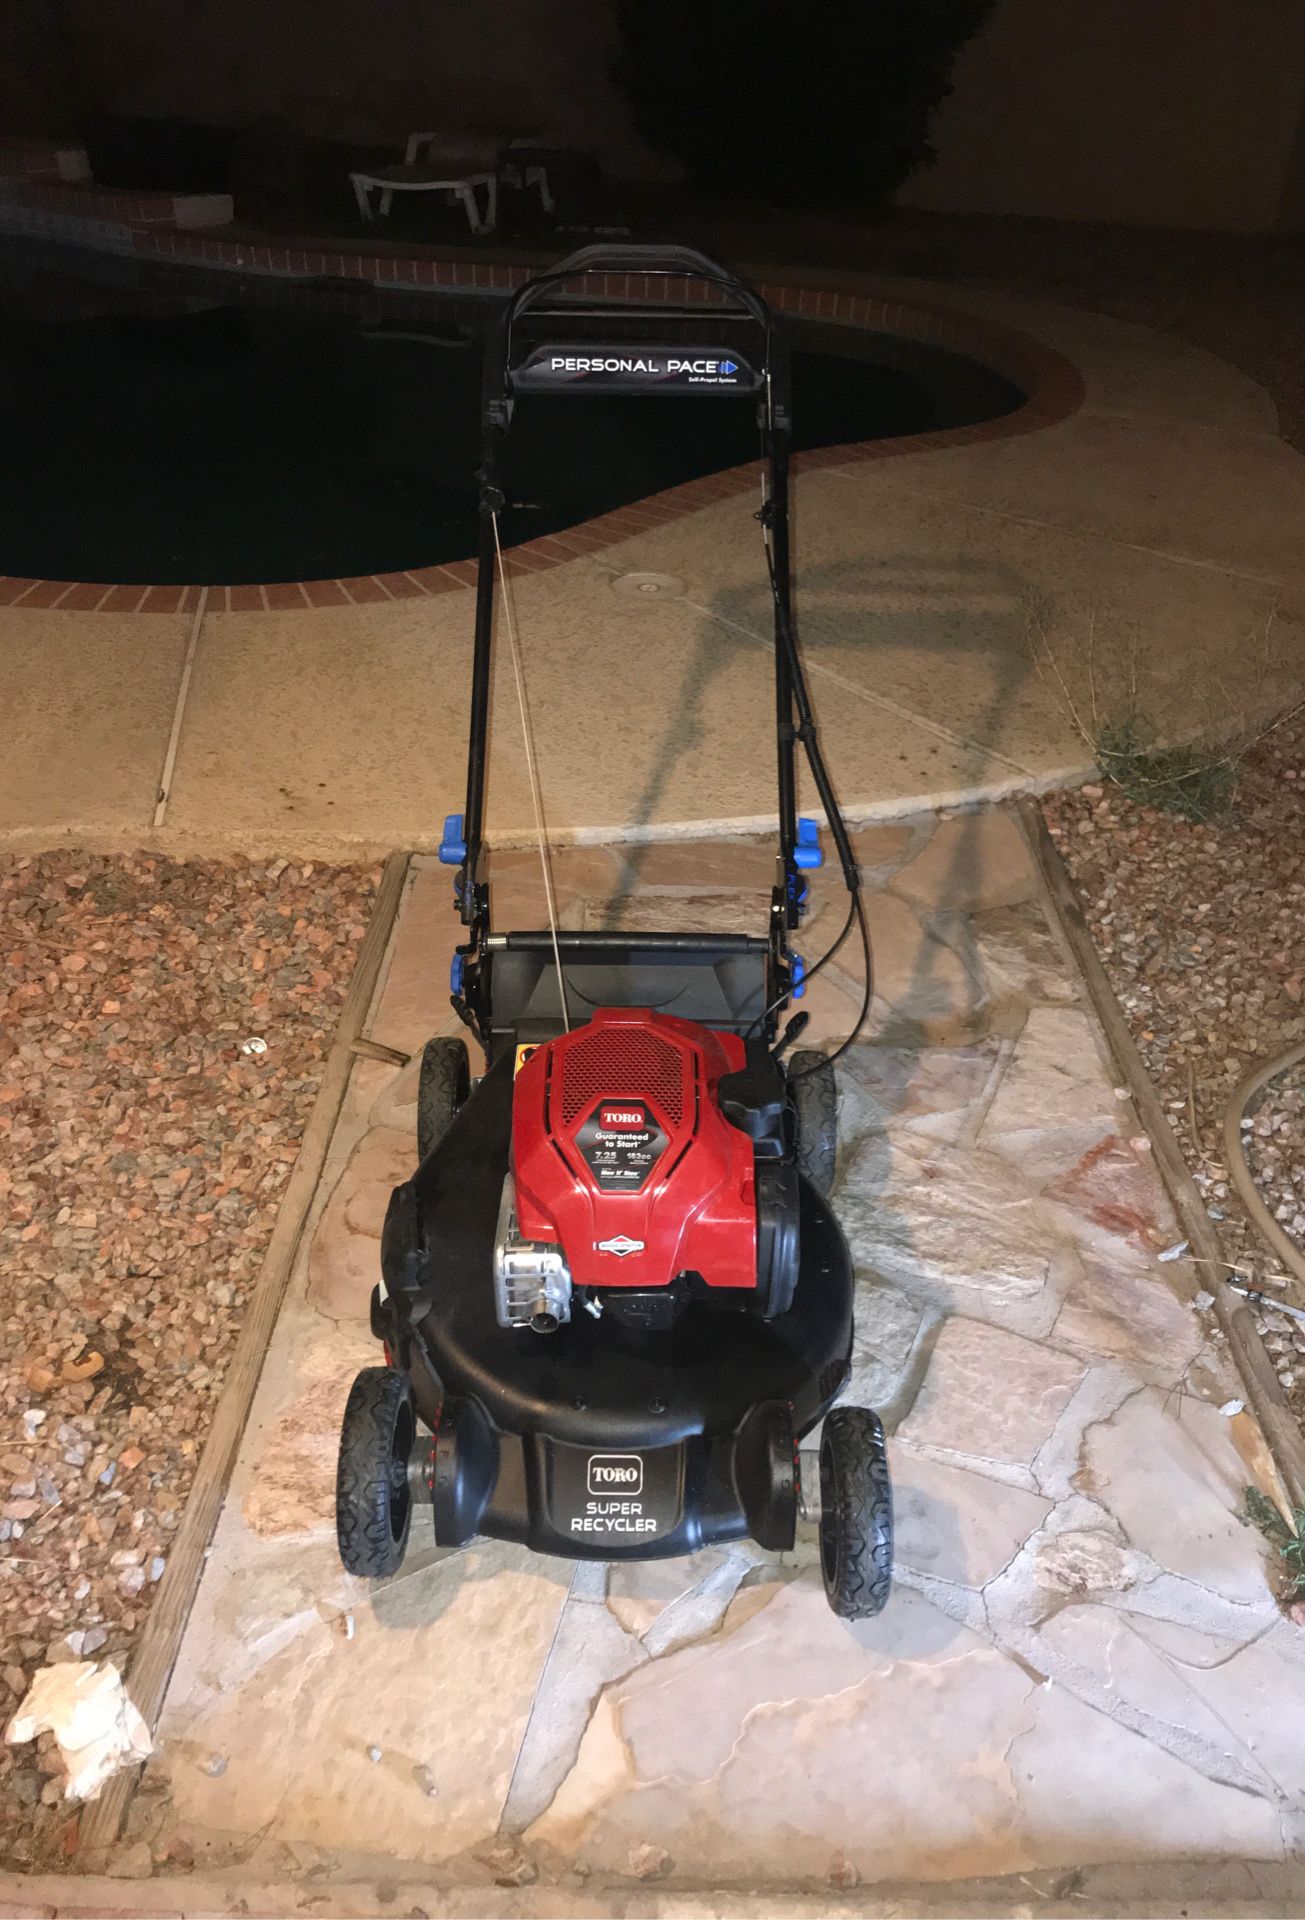 TORO SUPER RECYCLER WITH PERSONAL PACE AND A BRIGGS ENGINE